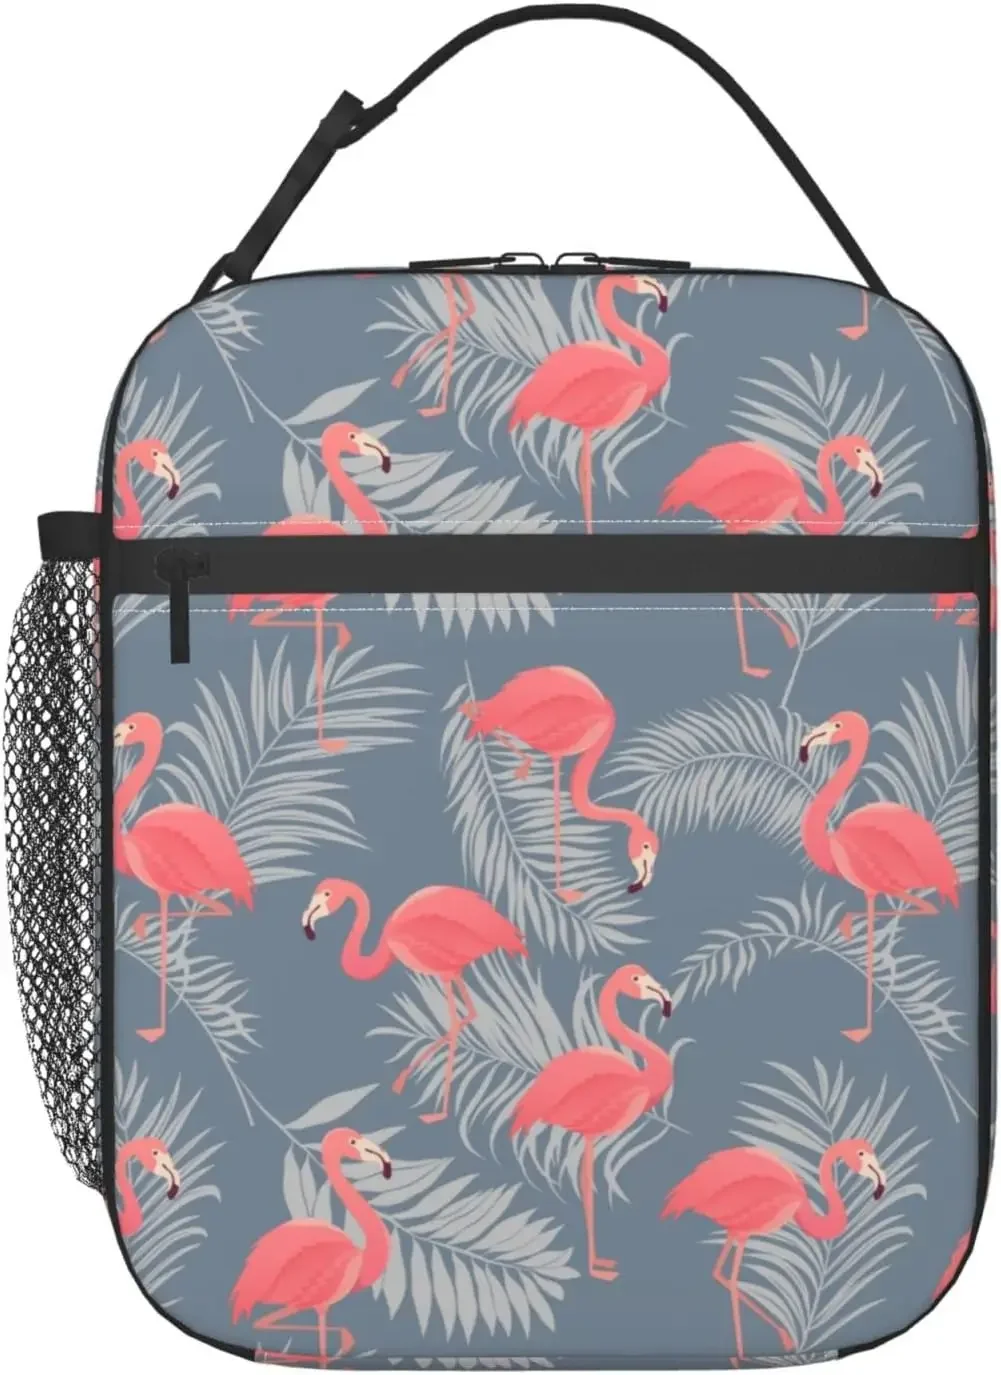 

Flamingo Bird Tropical Grey Leaf Insulated Lunch Bag Reusable Portable Meal Tote Bag for Office Work Travel Picnic